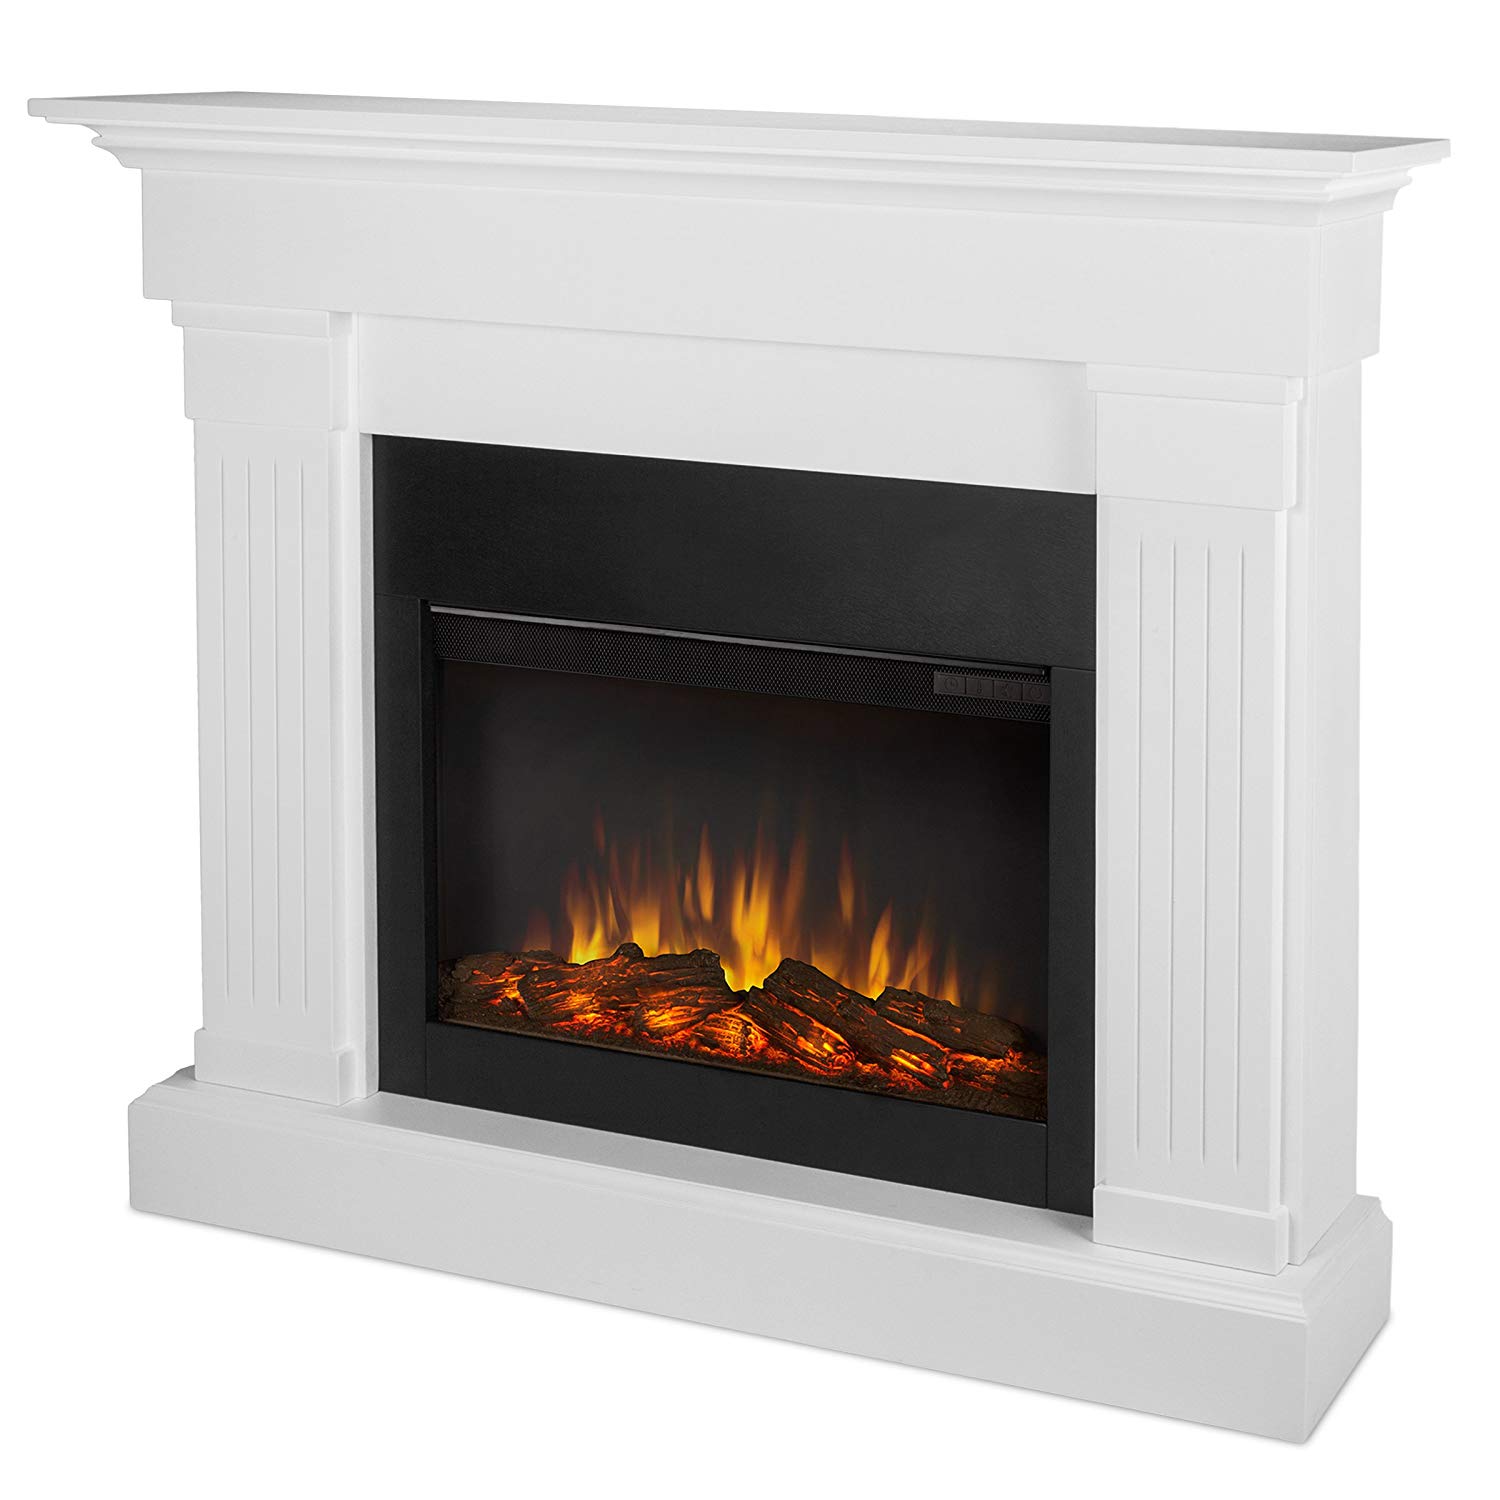 Fieldstone Electric Fireplace Awesome White Fireplace Electric Charming Fireplace